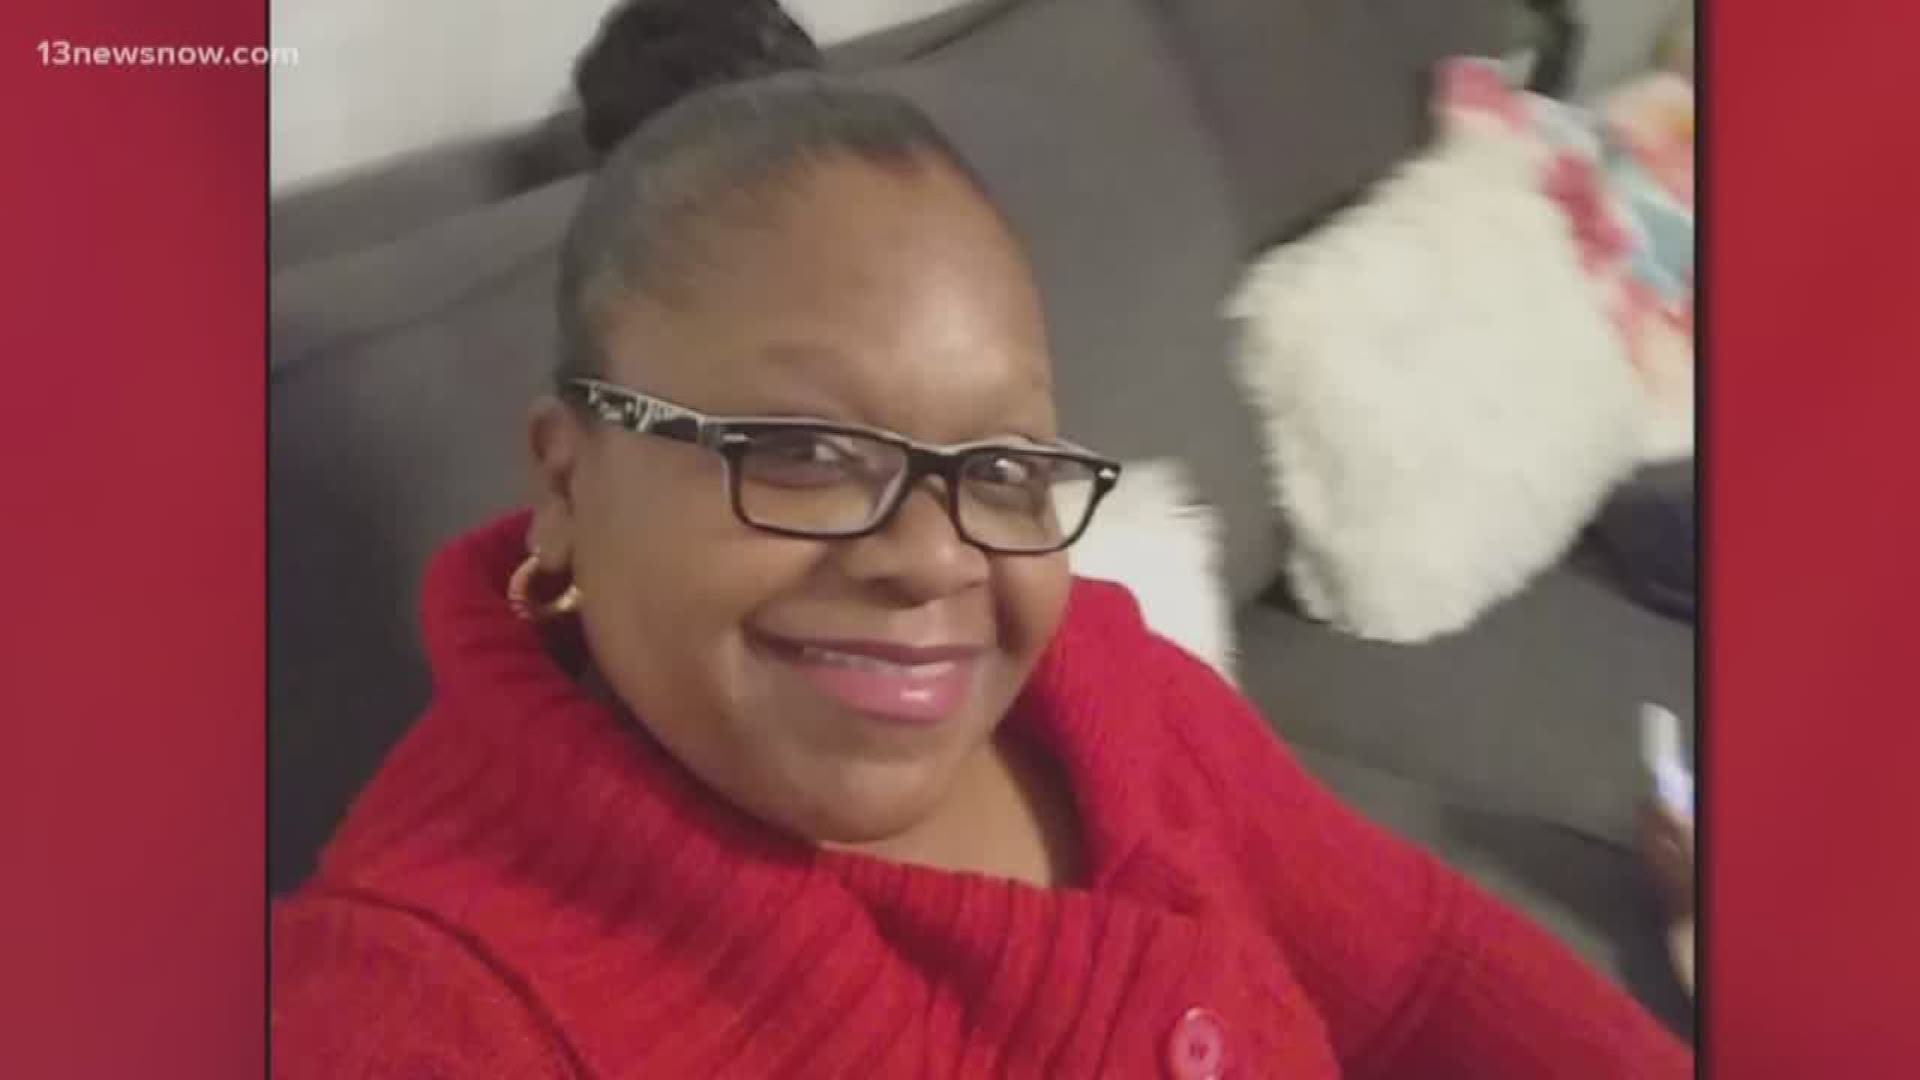 According to investigators, 34-year-old Cynthia Carver was supposed to meet a man Thursday night. She is a mother of two and is now missing.